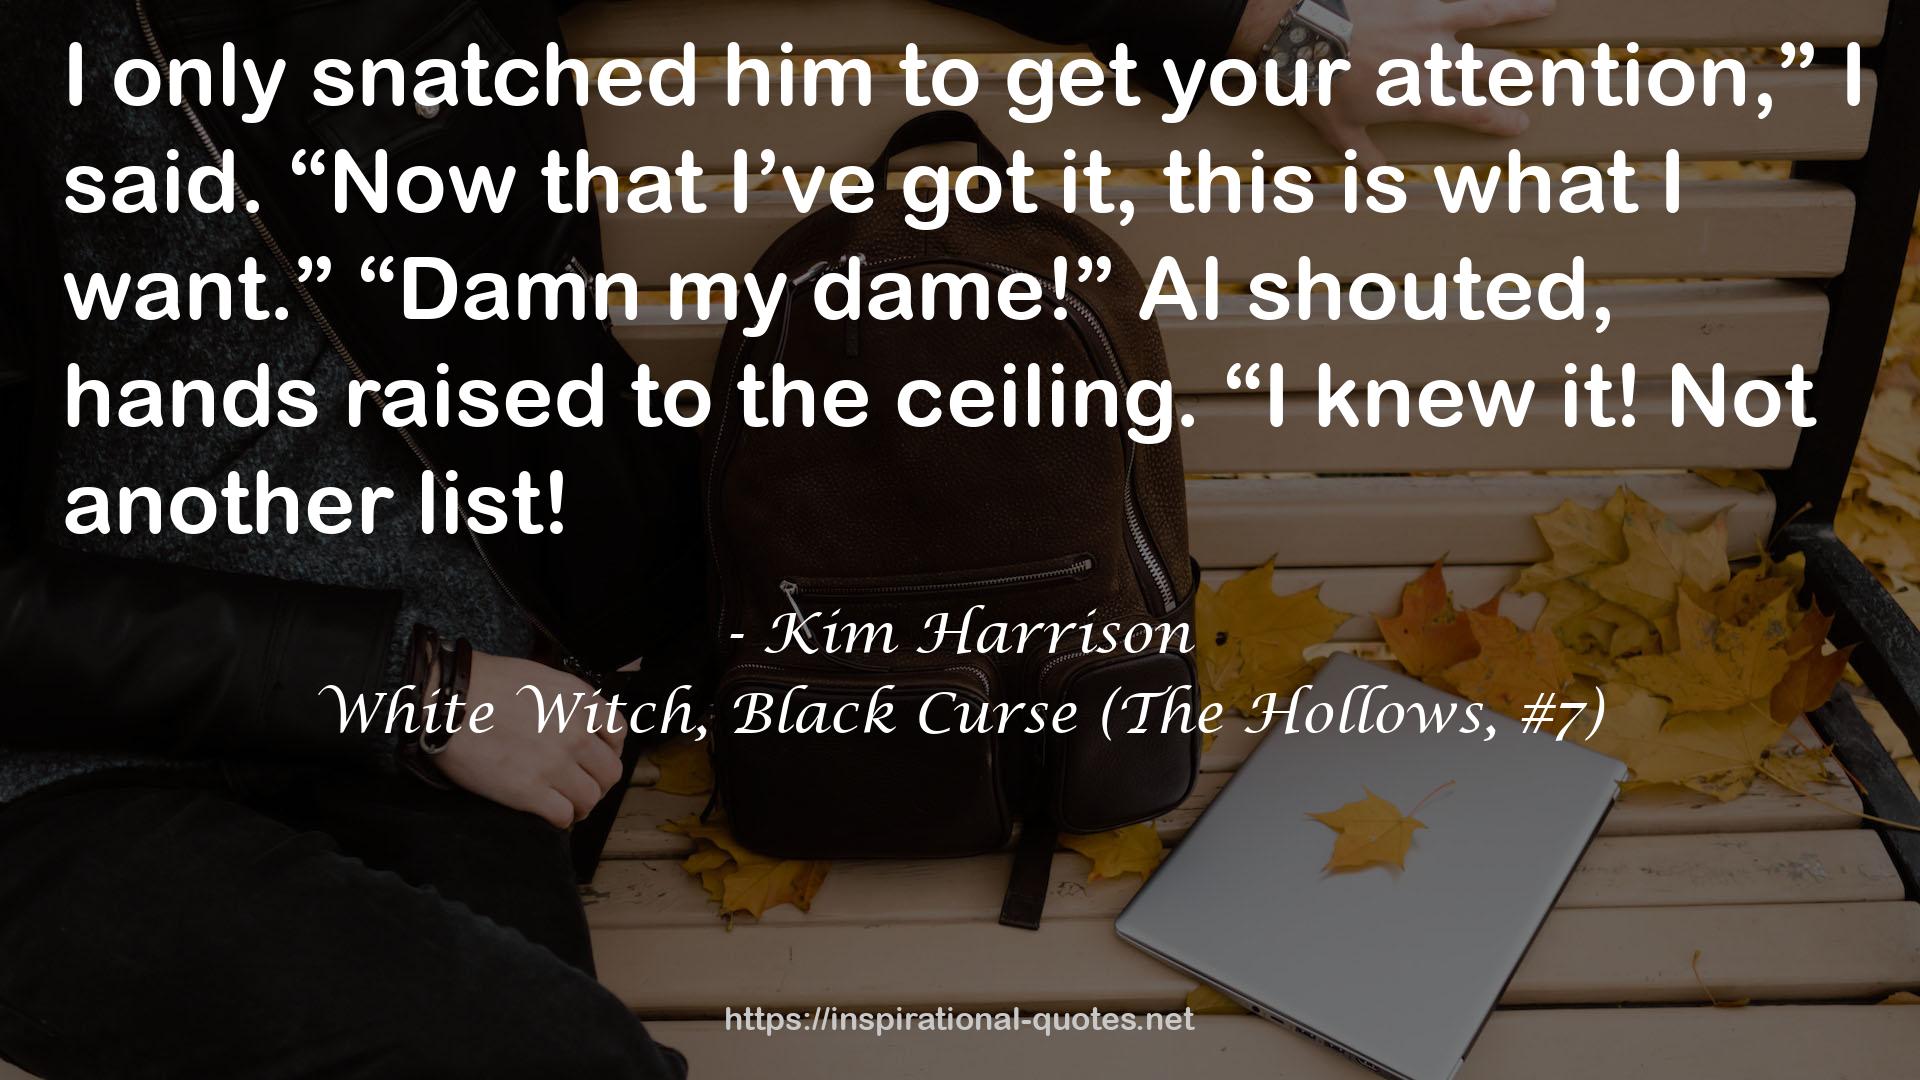 White Witch, Black Curse (The Hollows, #7) QUOTES